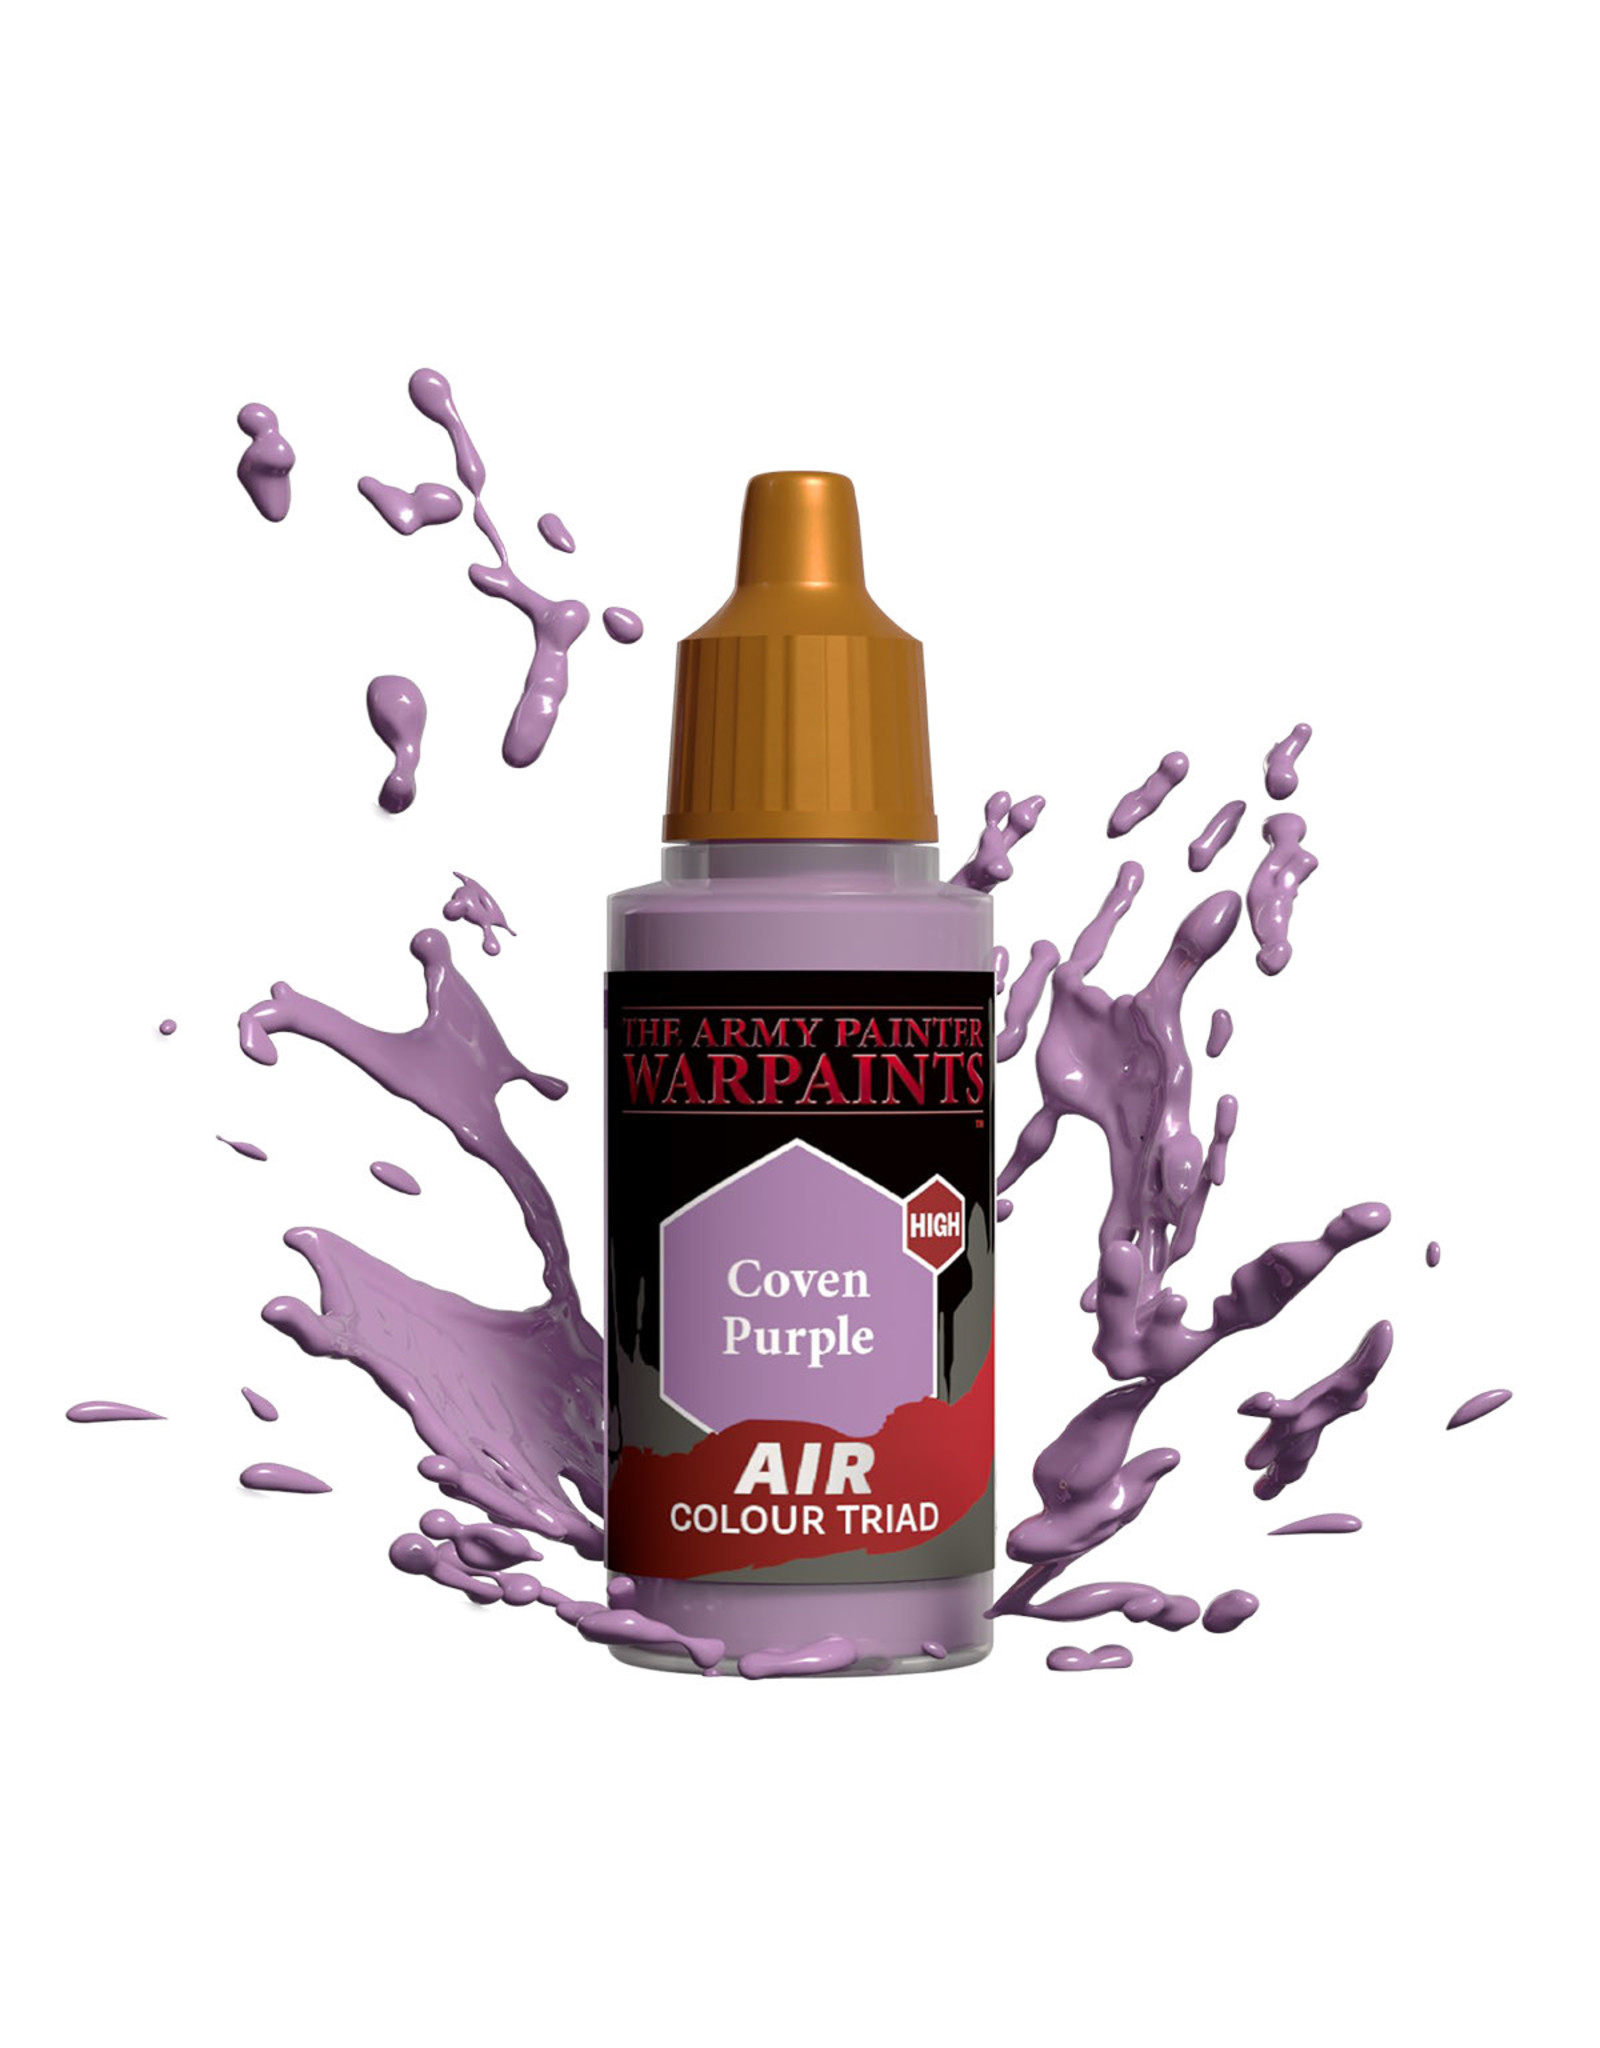 The Army Painter The Army Painter Warpaints Air: Coven Purple